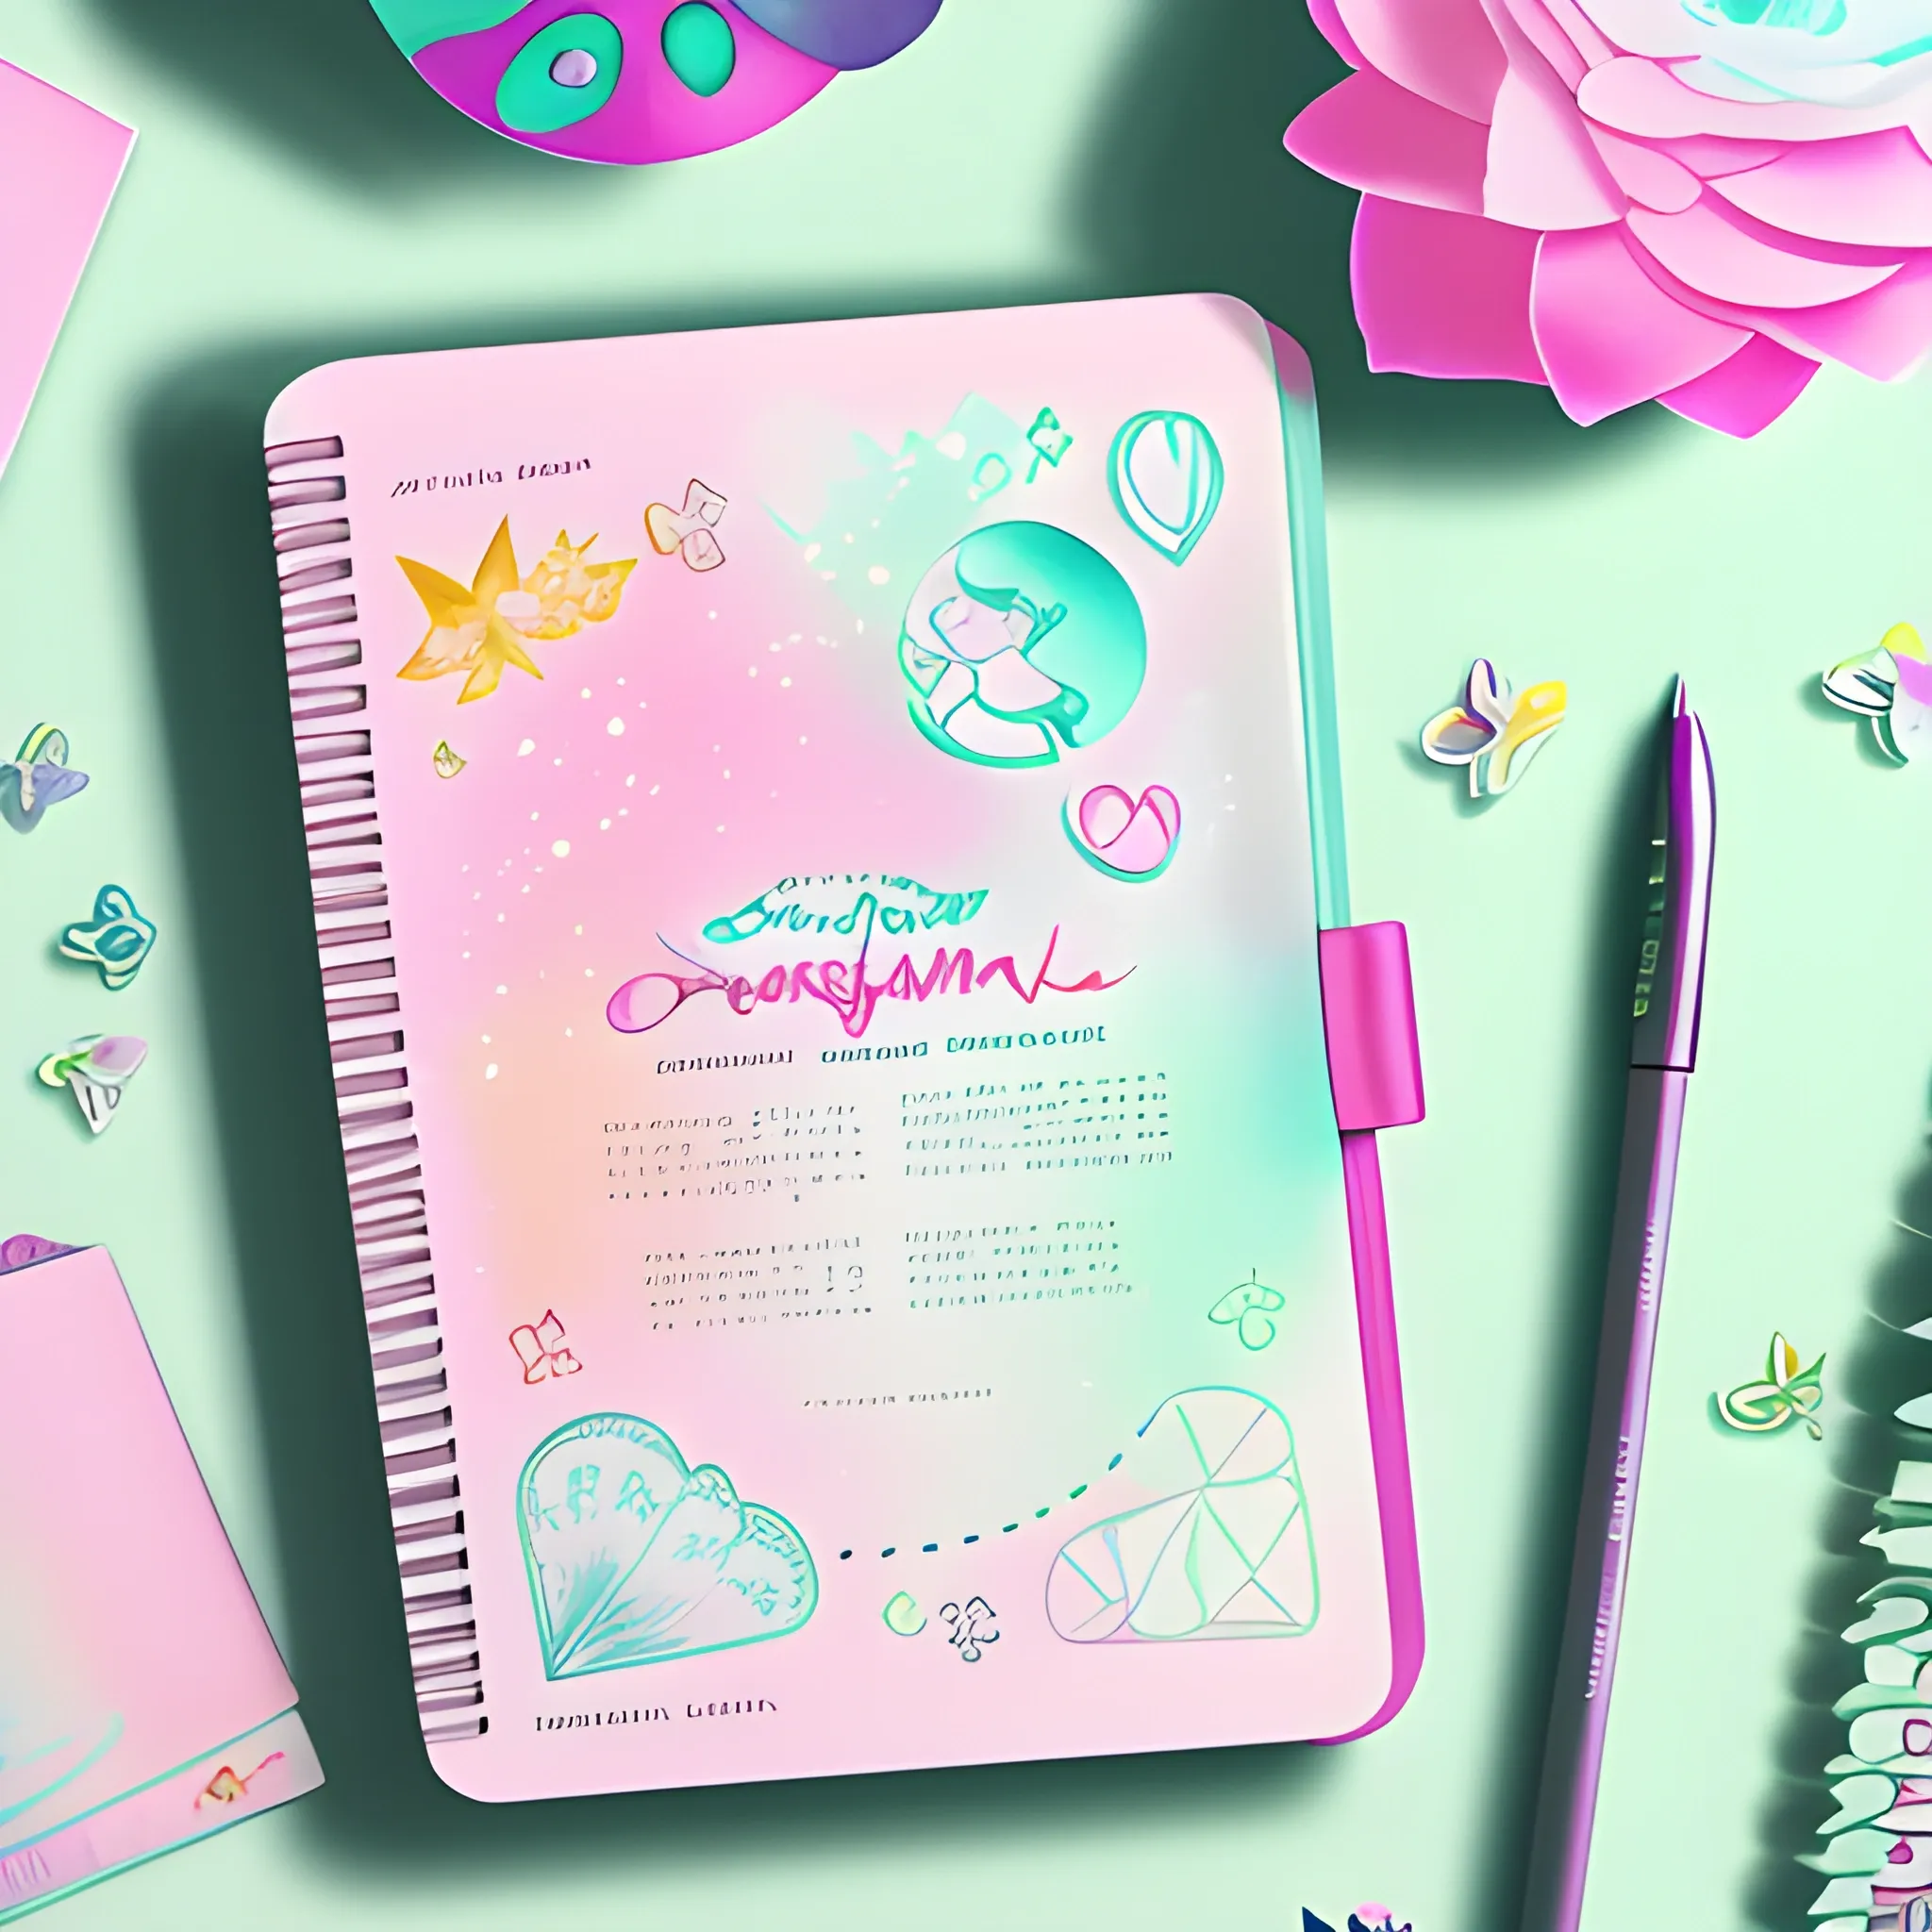 chaotic dream journaling artwork using tinker bell animation movie element in pastel colour scheme. soft focus print designs. 
graphic, animated, 